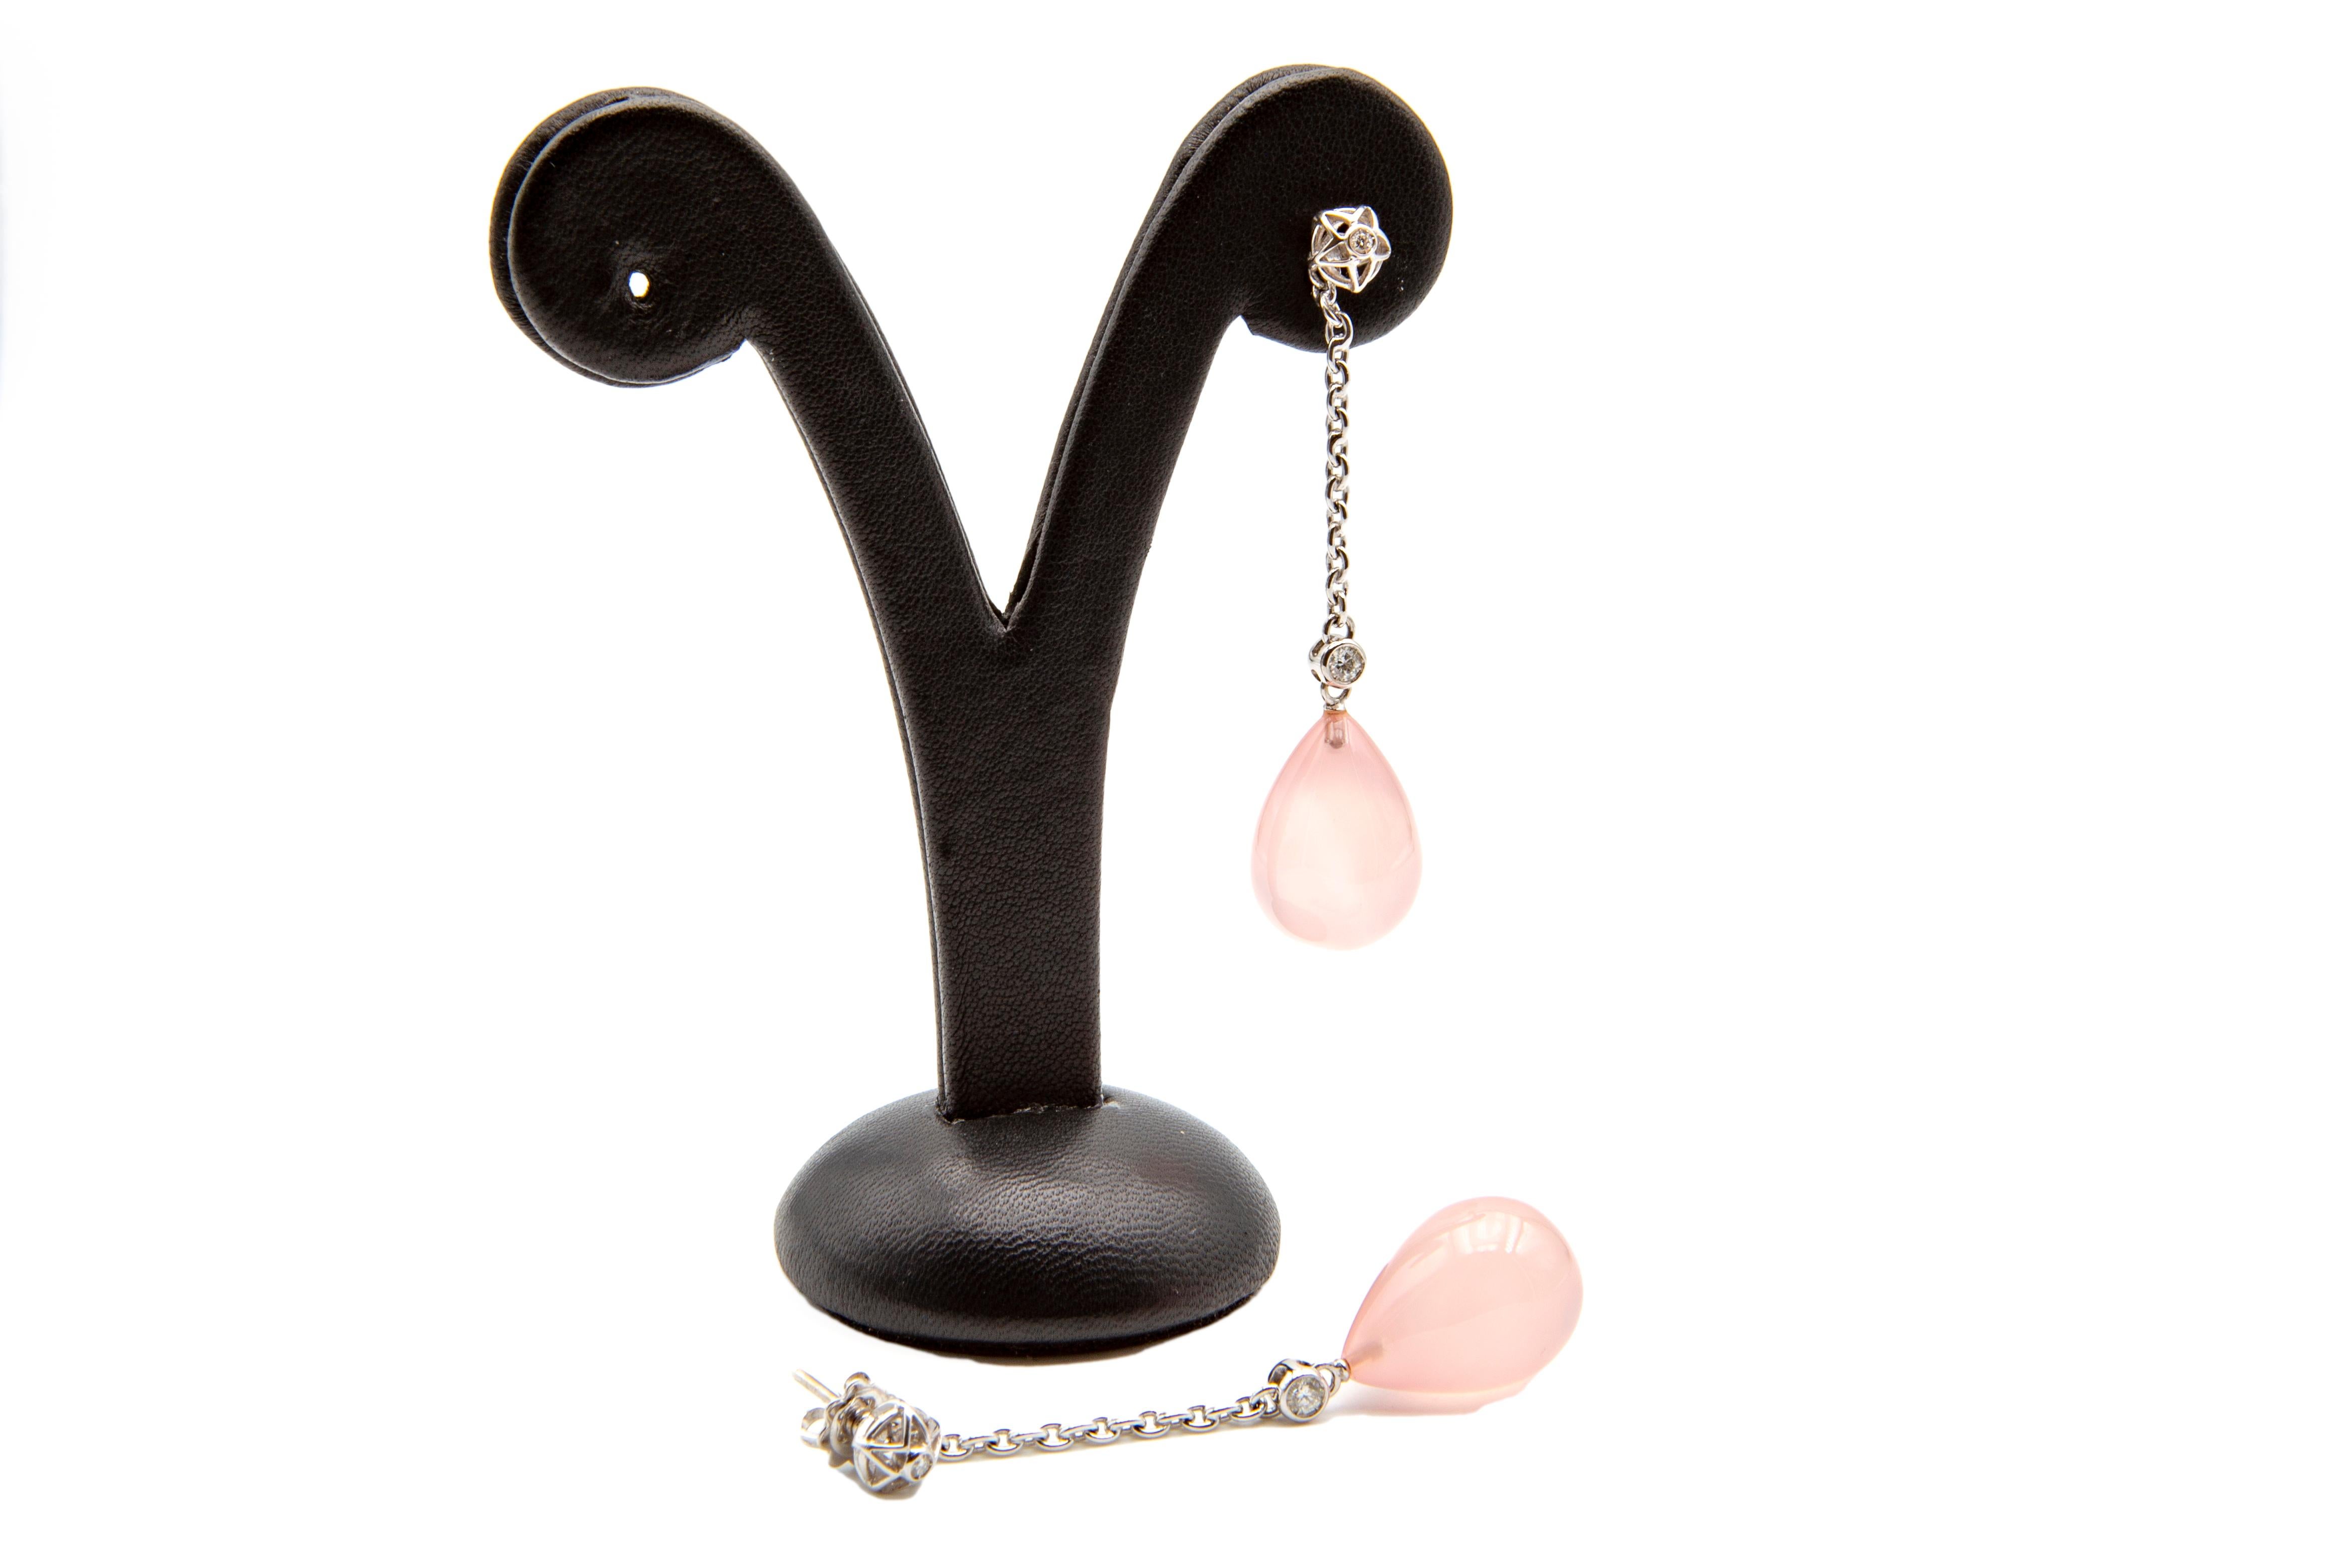 These modern gorgeous long swinging earrings are handcrafted in 18K white gold, rose quartz and diamonds.
0,20 Carat Diamonds - Quartz drops (20x15 mm)
